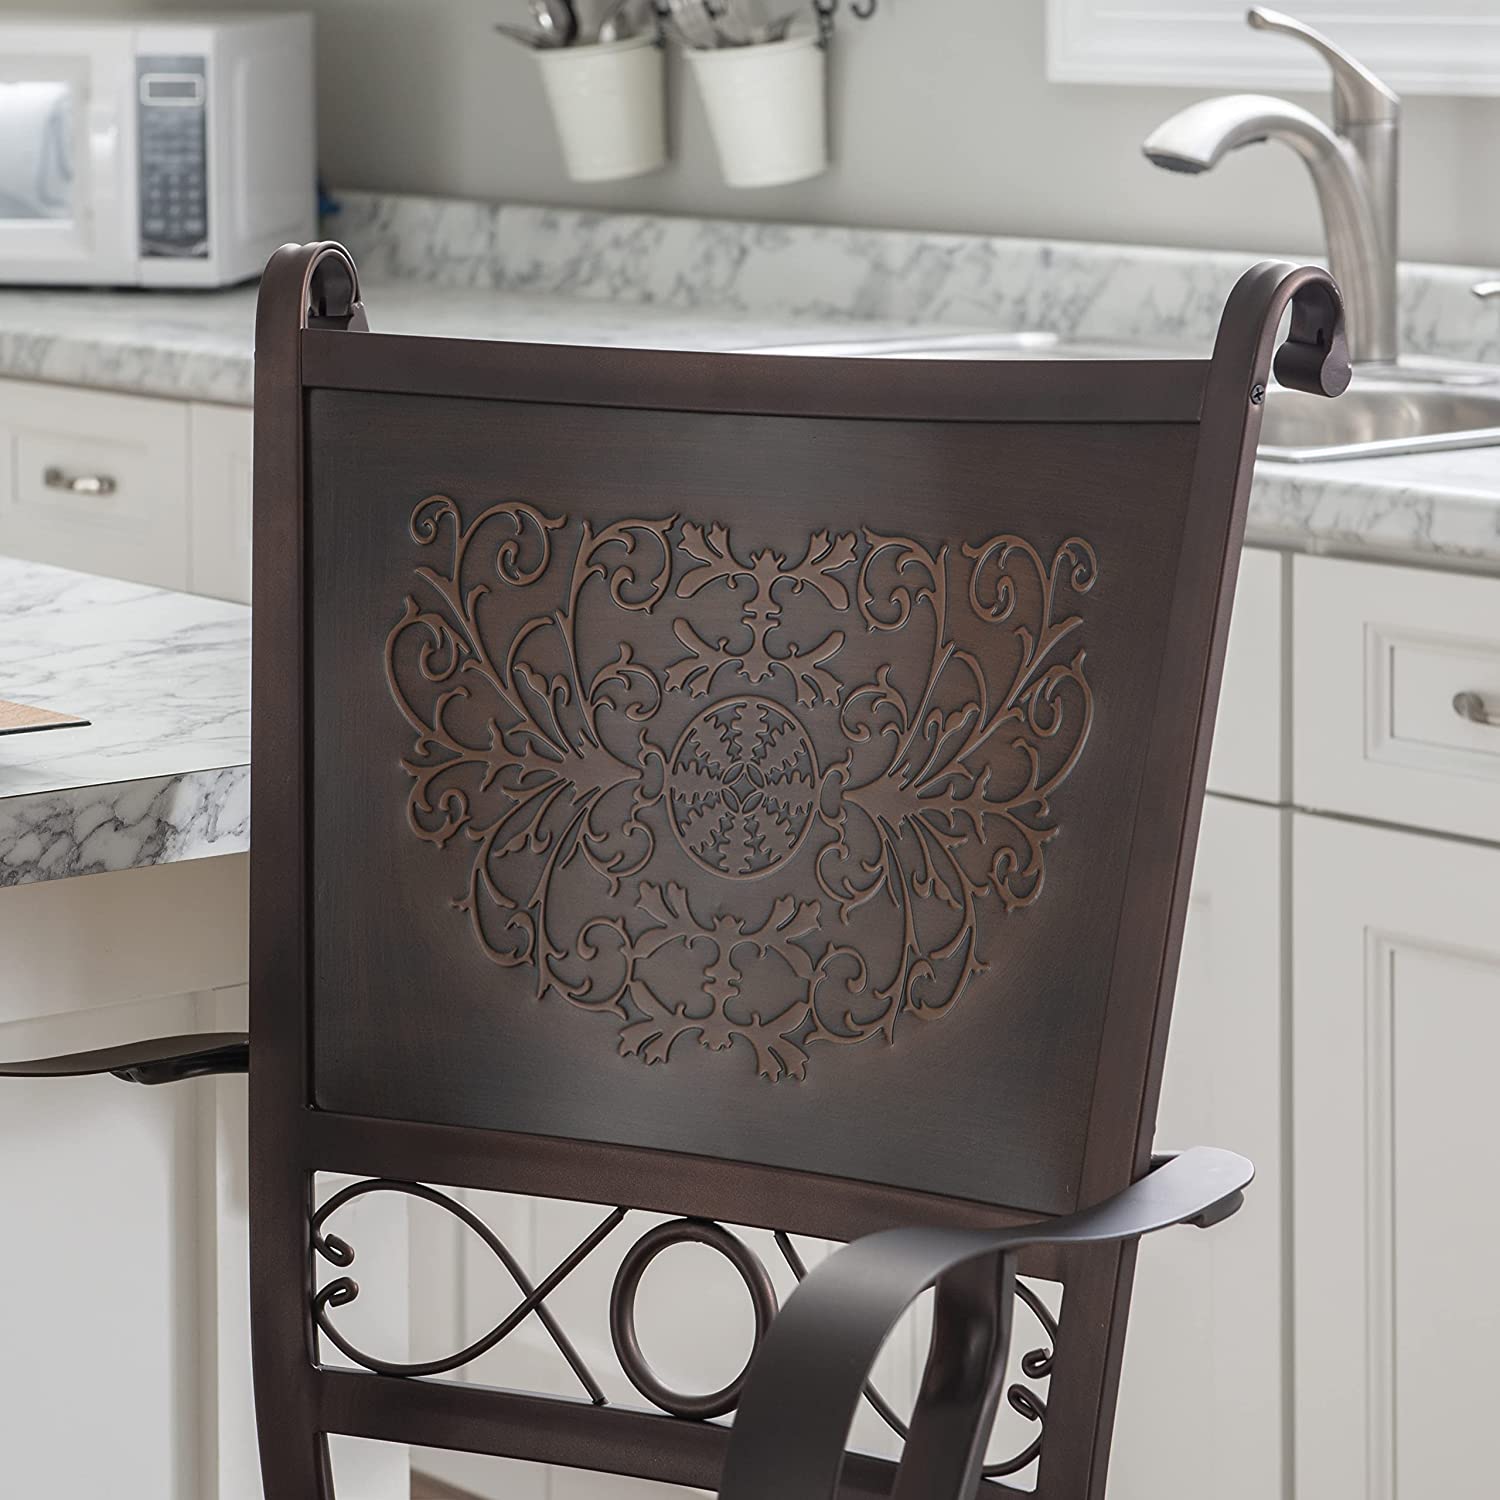 Powell Company Big &amp; Tall Copper Stamped Back Arms by Powell Big and Tall Counter Stool, 24&#34; Seat Height, brown